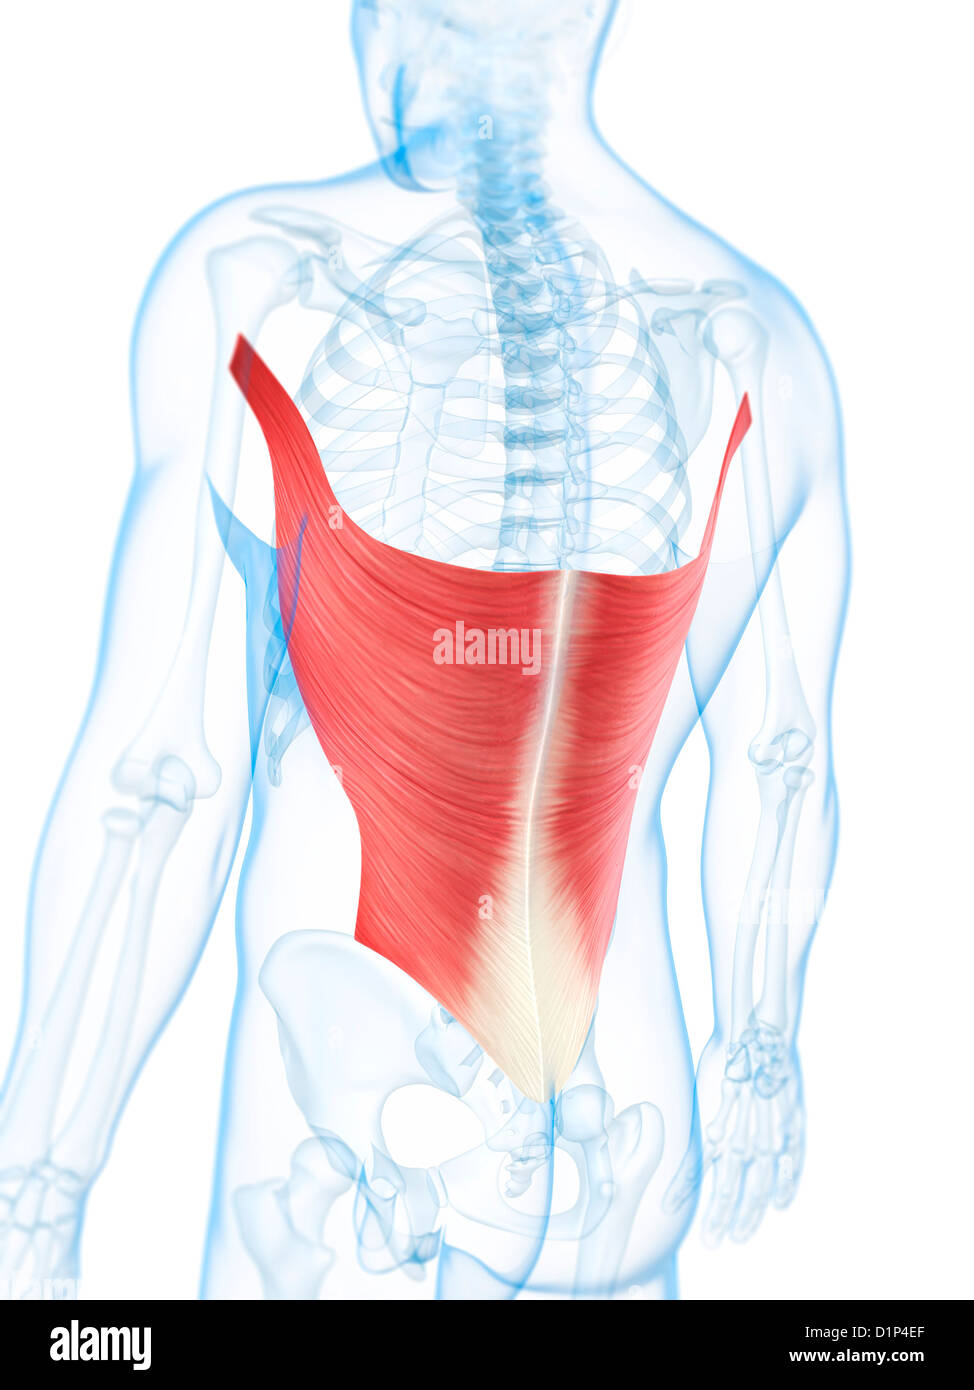 Human Body Muscles Anatomy High Resolution Stock Photography and Images